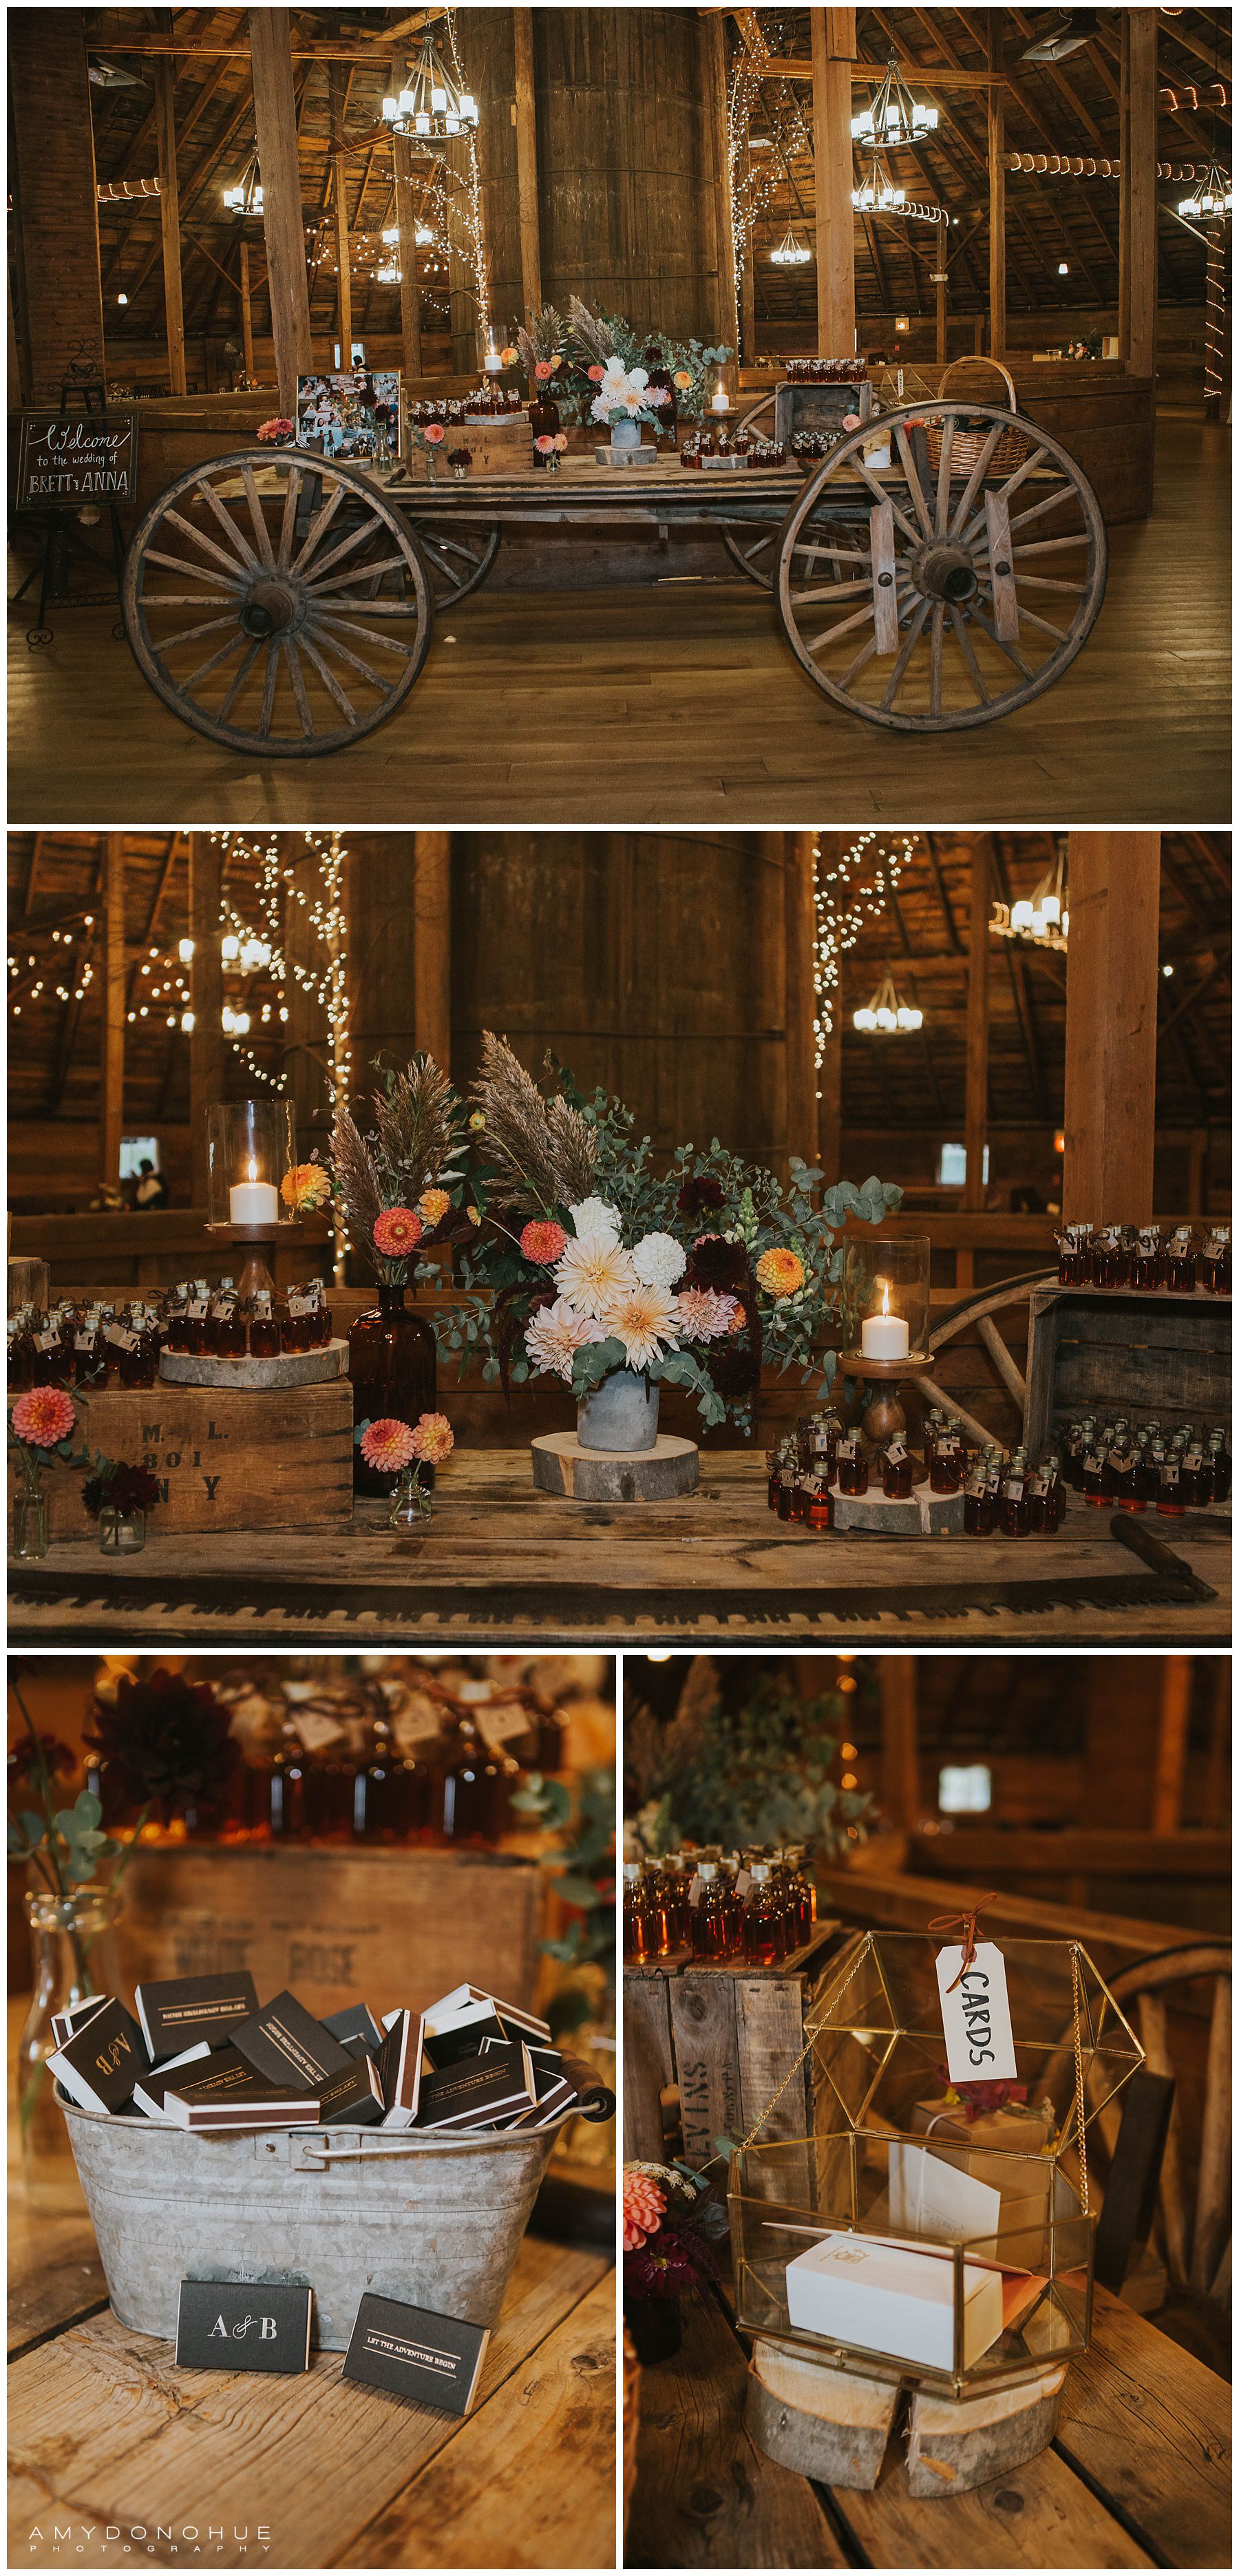 Wedding Reception Details | The Inn at Round Barn Farm | © Amy Donohue Photography